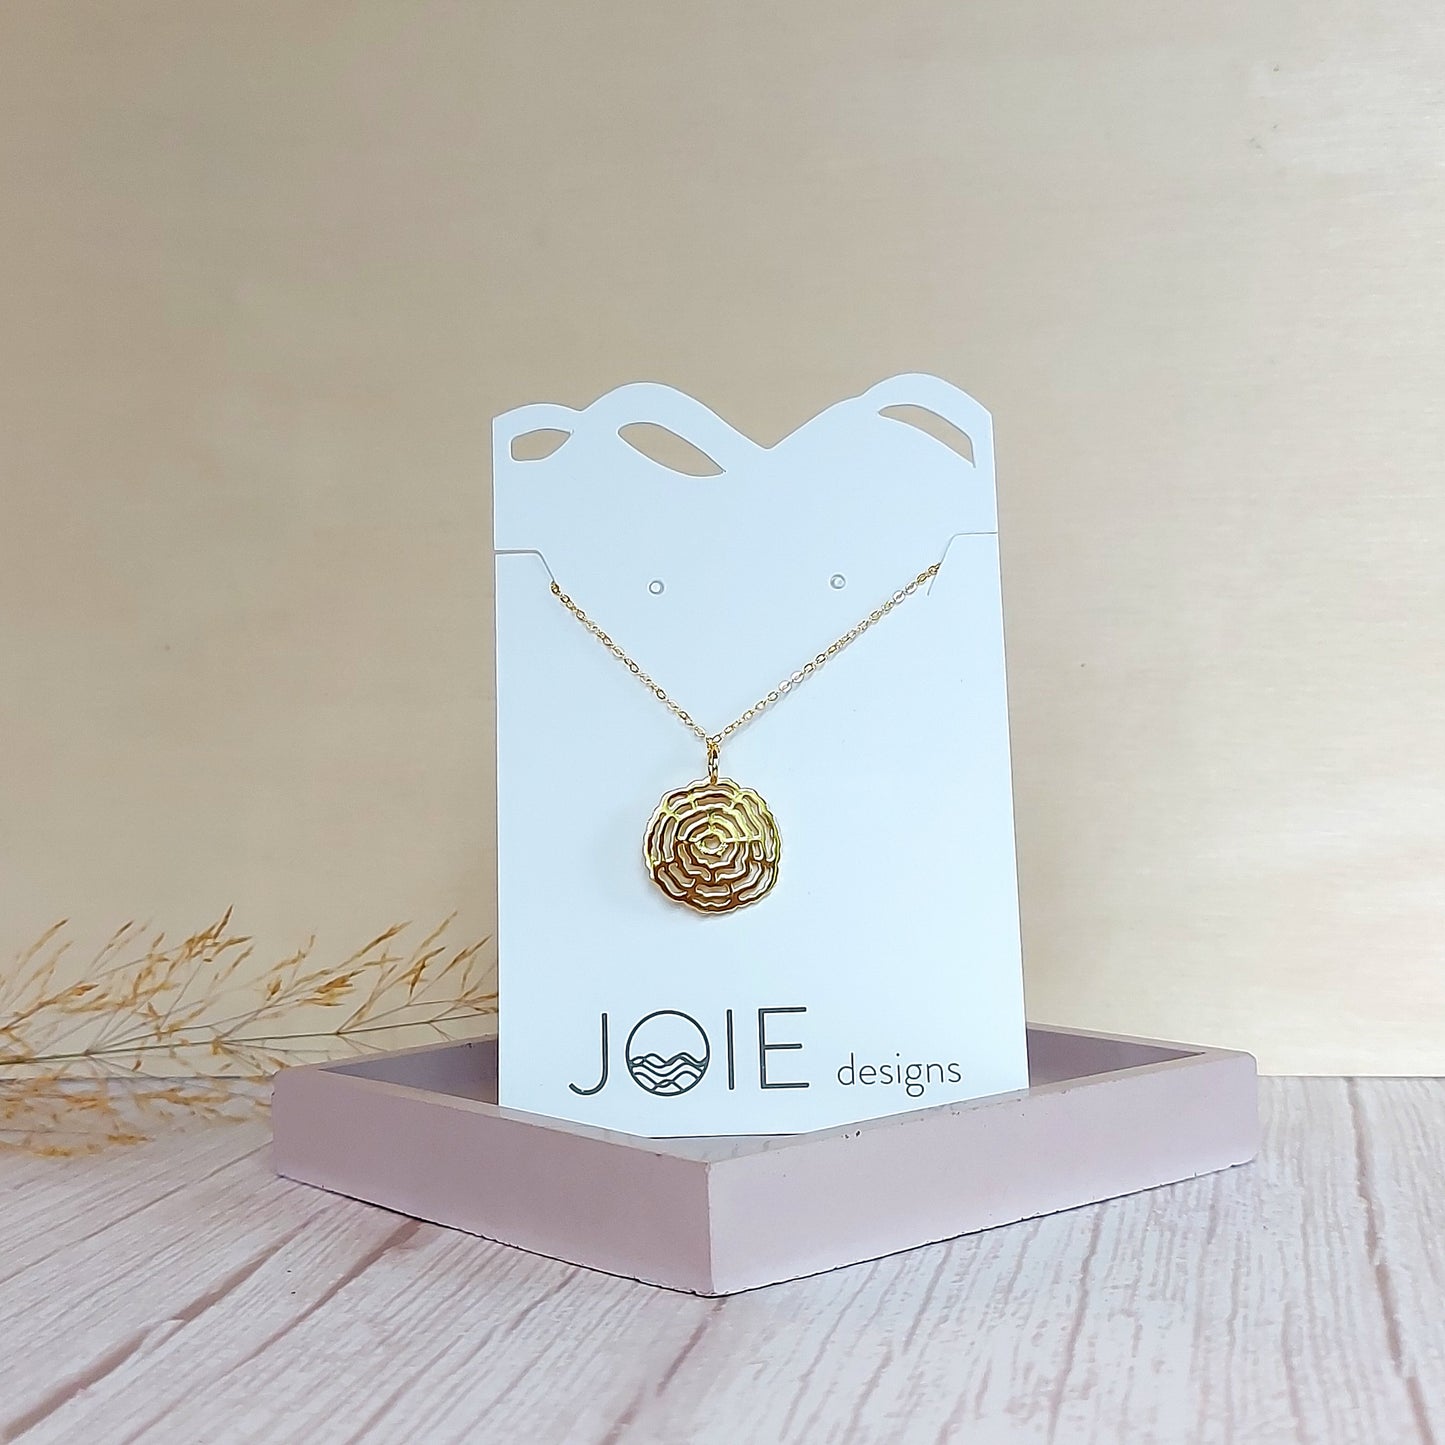 18k plated yellow gold plated Vita Tree ring pendant necklace with heart center cut out on white jewelry card